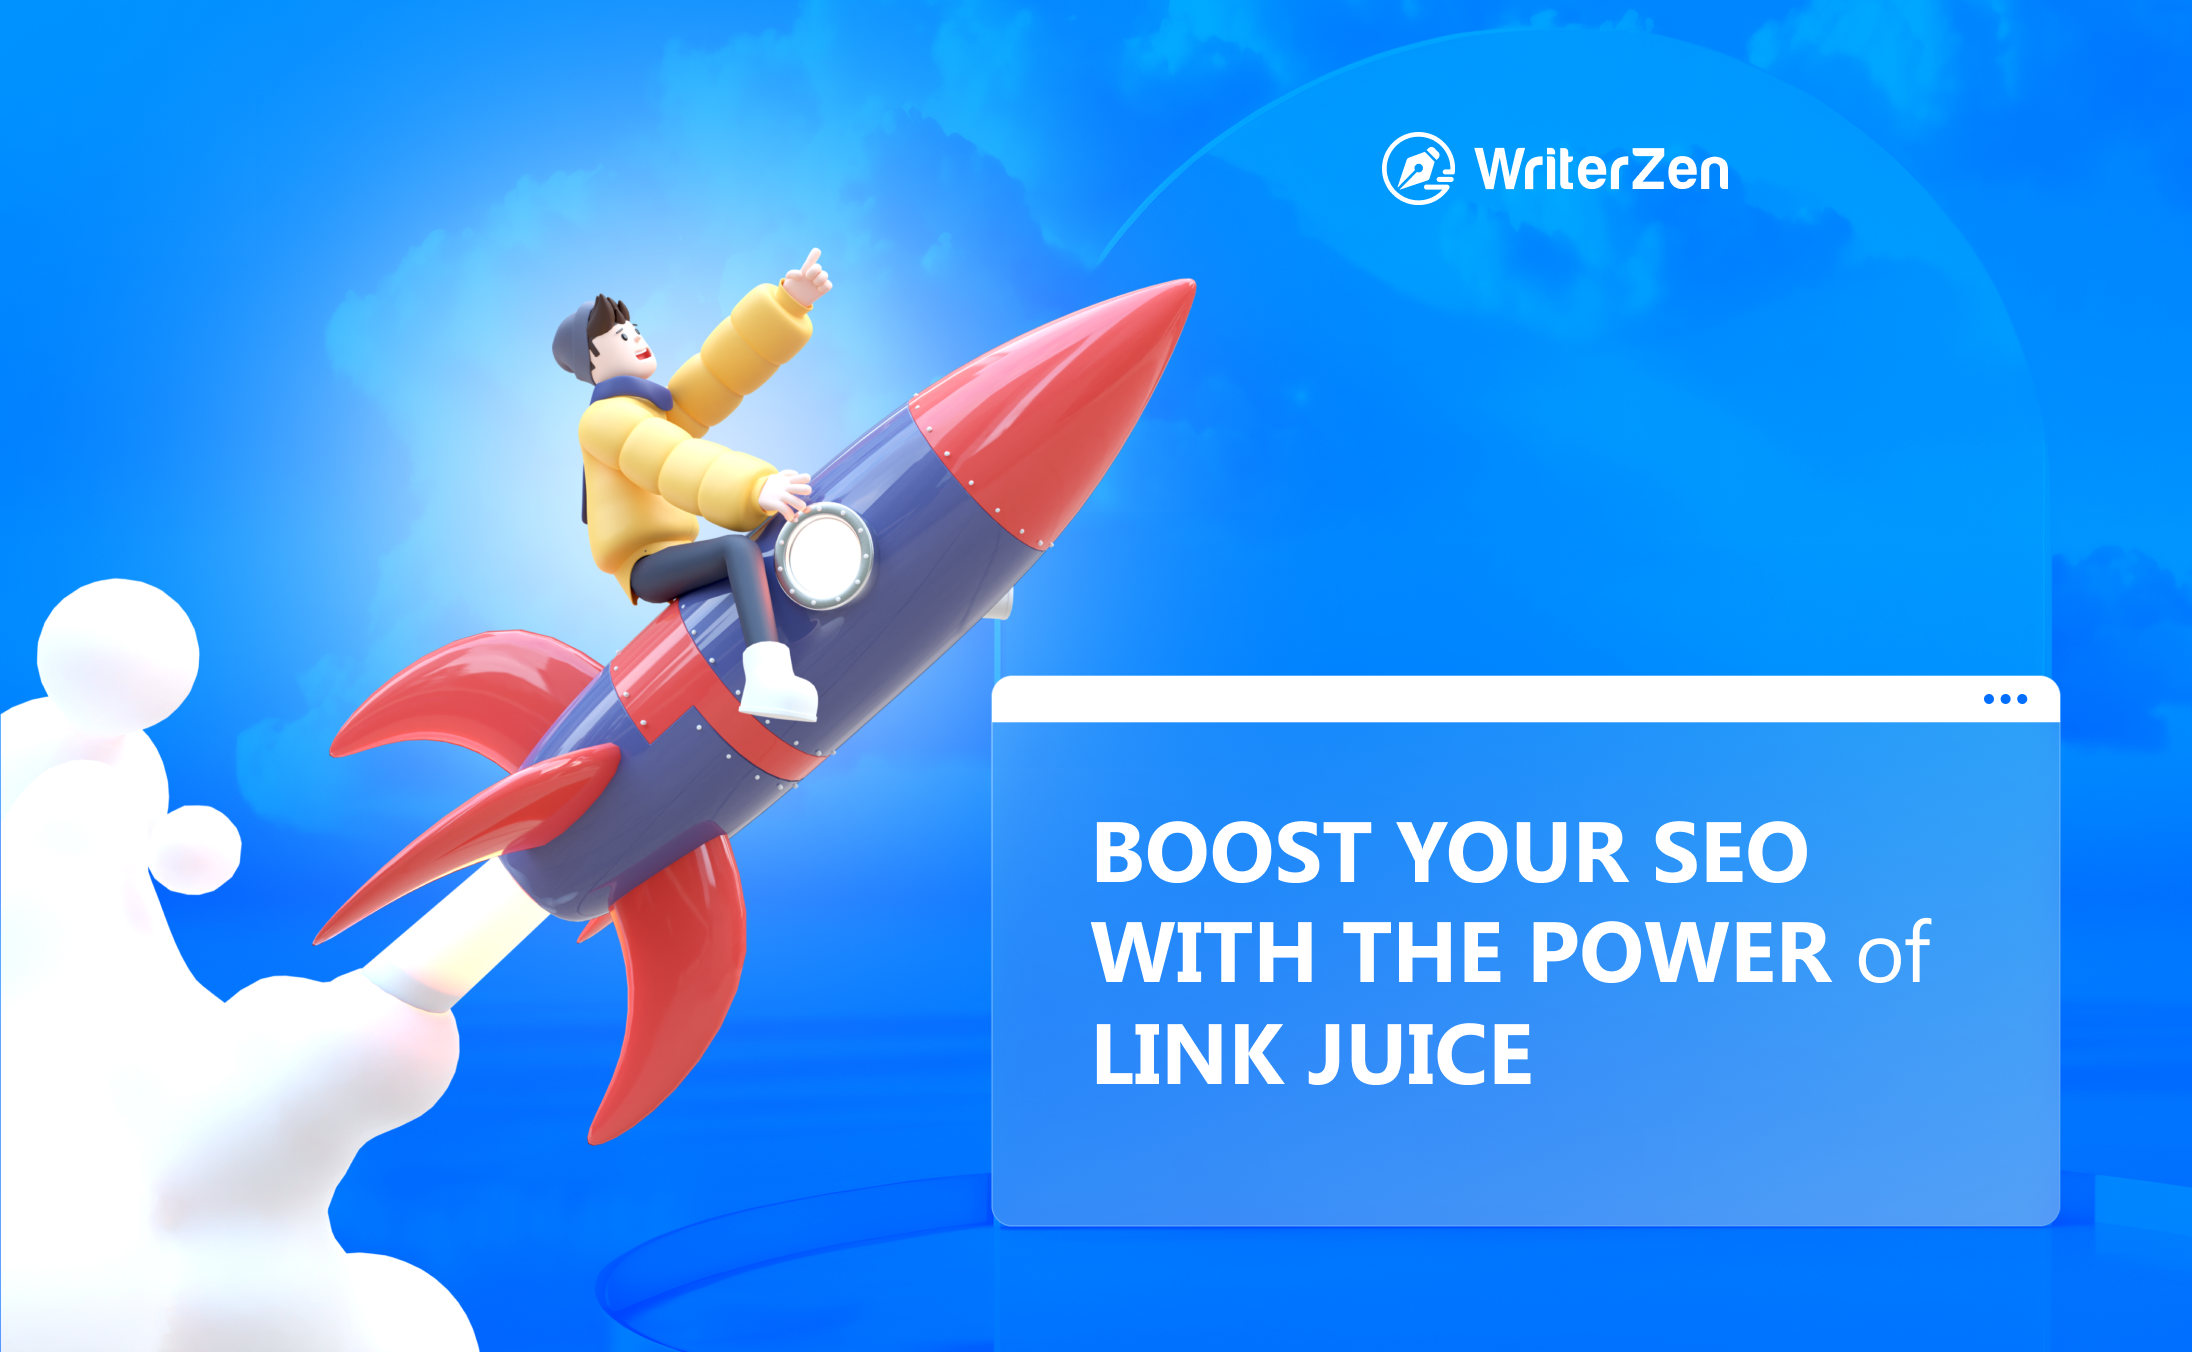 Boost Your SEO with the Power of Link Juice